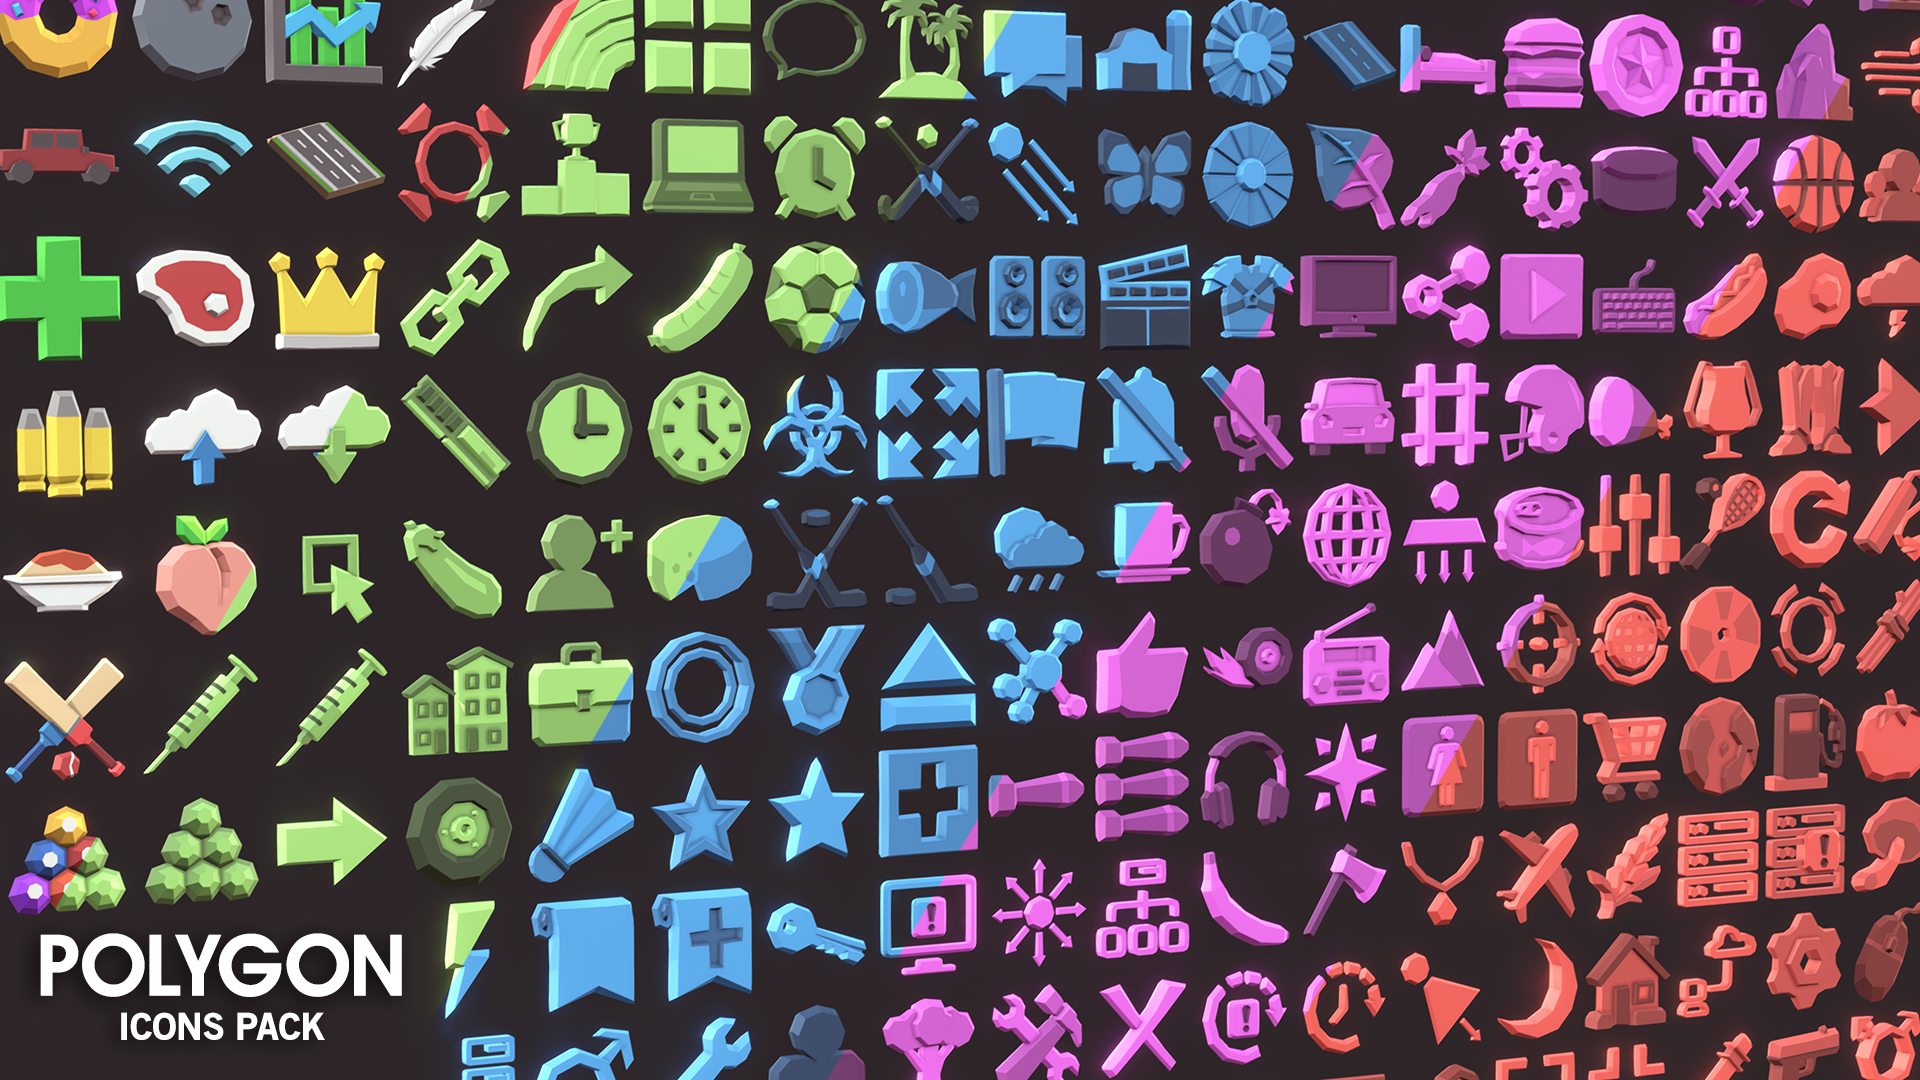 Icons asset pack to add to your Polygon style game